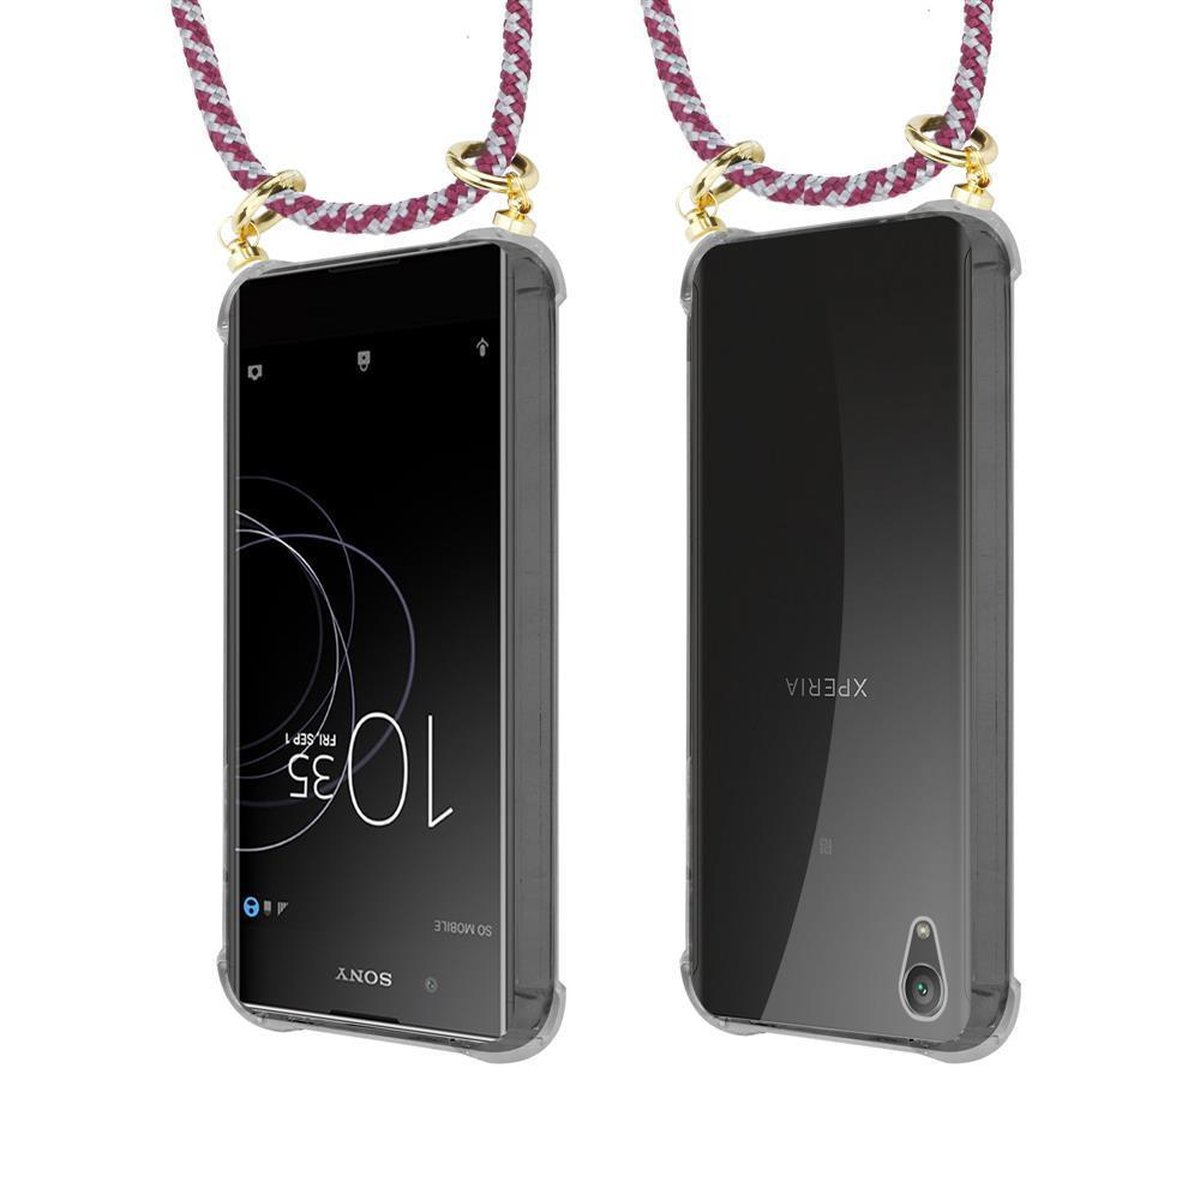 Sony, mit und Backcover, Kette Handy Hülle, WEIß ULTRA, Gold Xperia abnehmbarer Band XA1 CADORABO ROT Ringen, Kordel